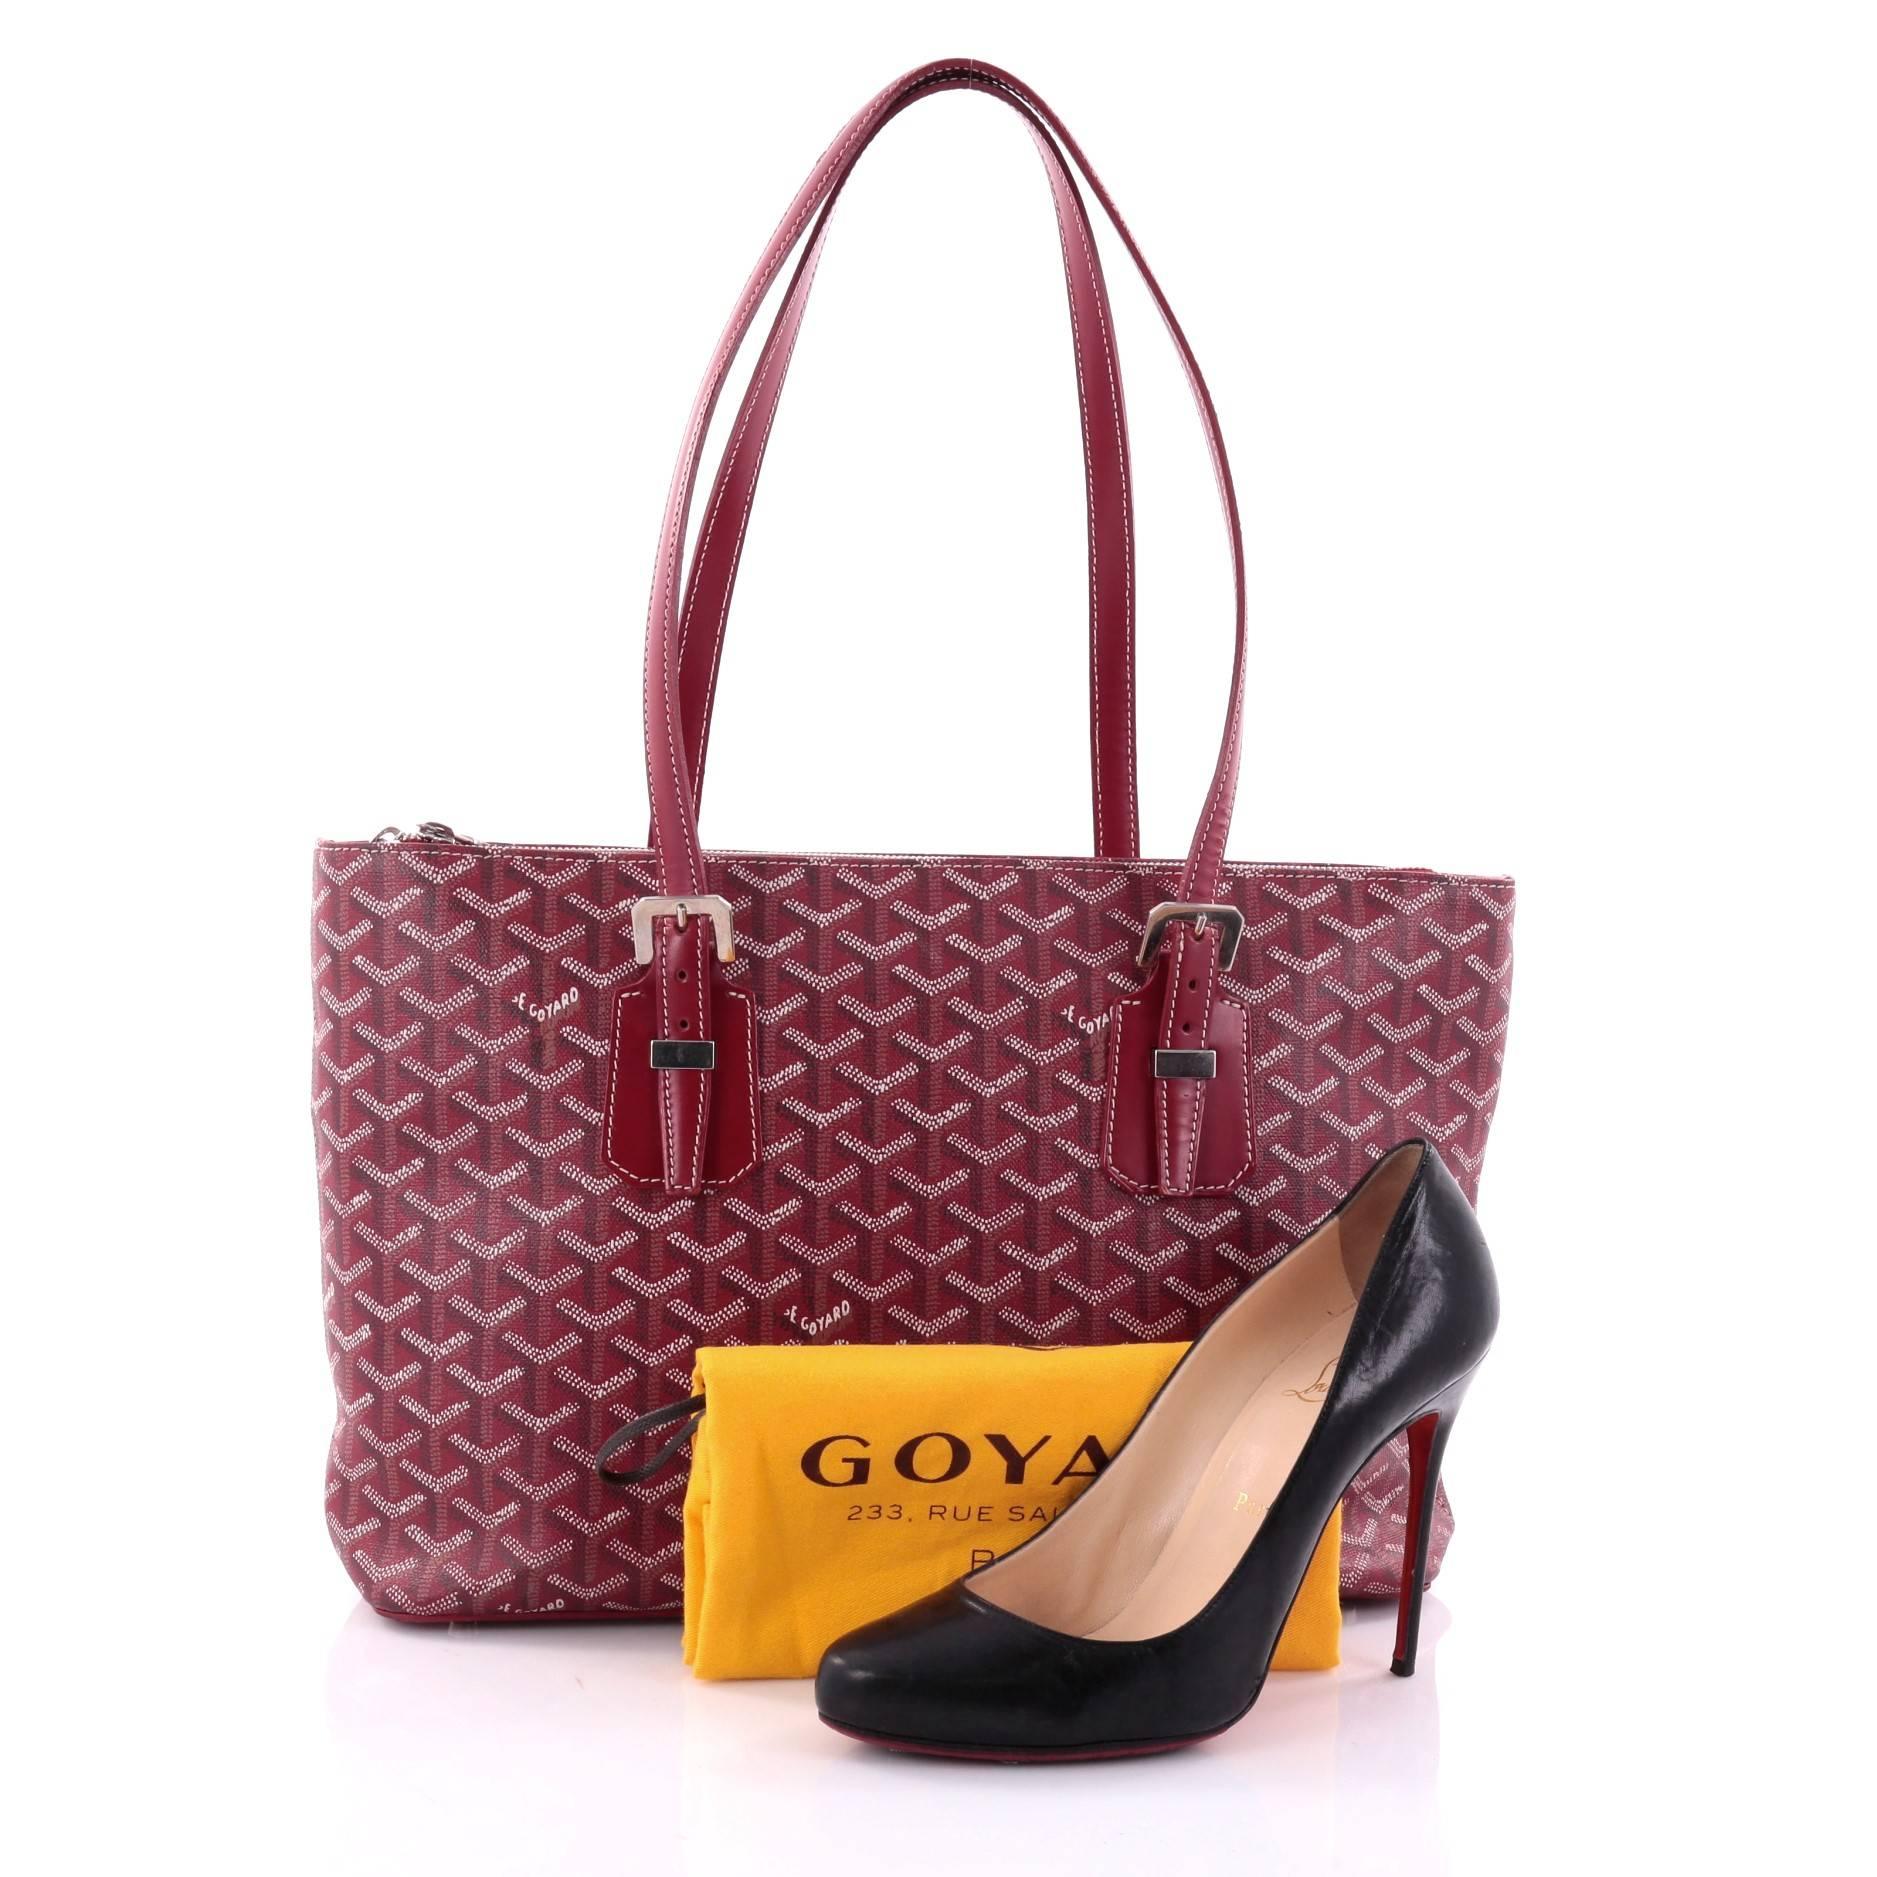 This authentic Goyard Okinawa Handbag Canvas PM displays a luxurious and casual sophistication perfect for travel or everyday use. Crafted from red Goyardine chevron coated canvas, this bag features dual flat shoulder straps with buckle detailing,